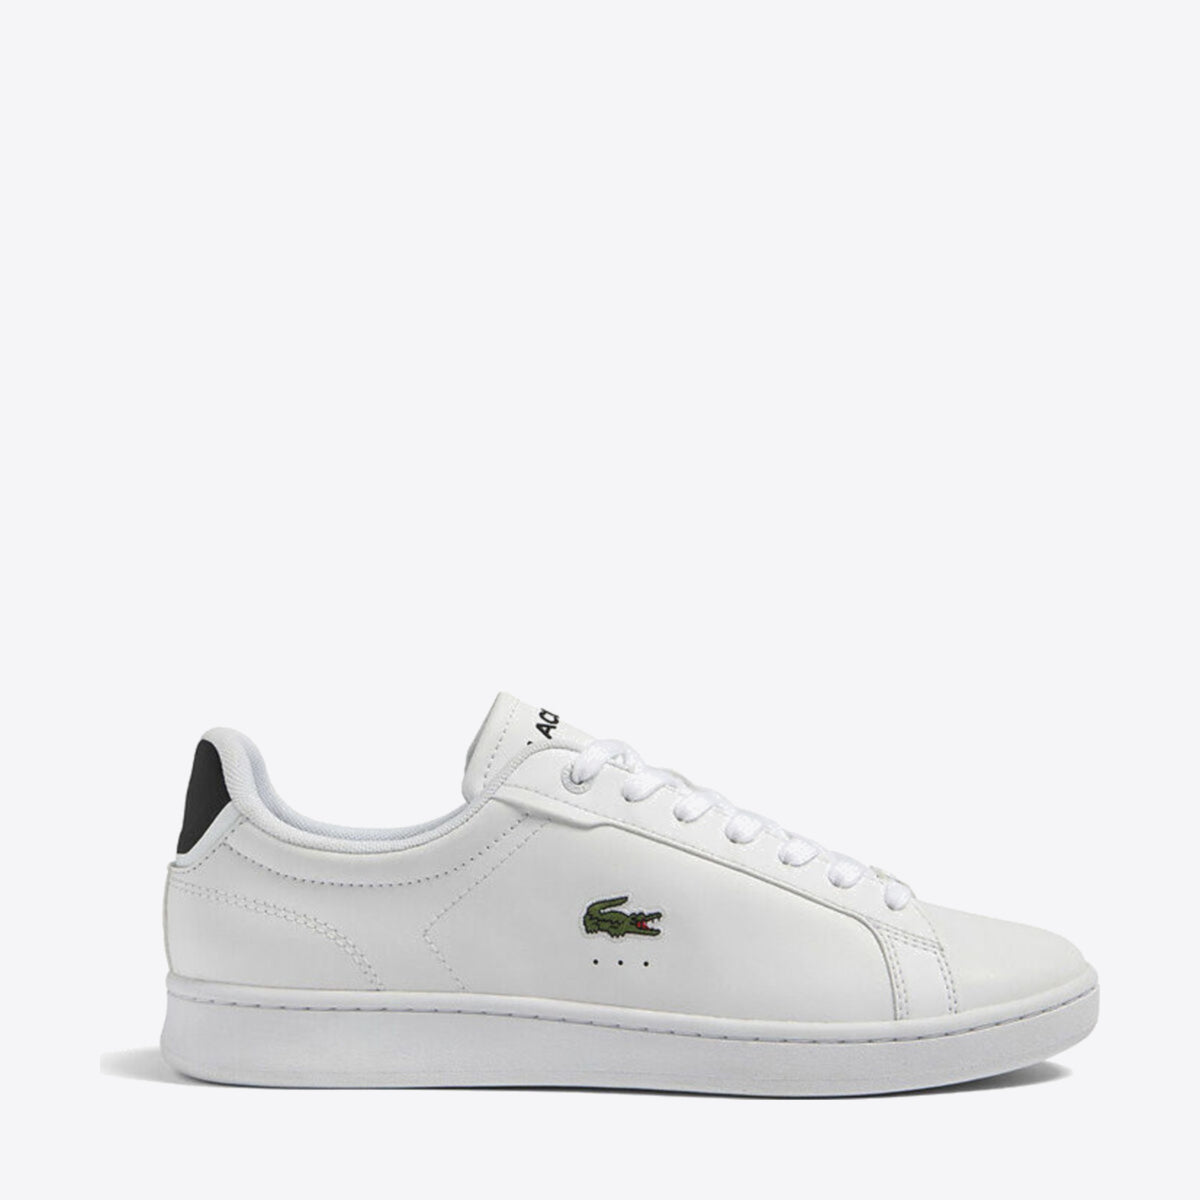 LACOSTE Carnaby Pro 123 White/Black - Image 1